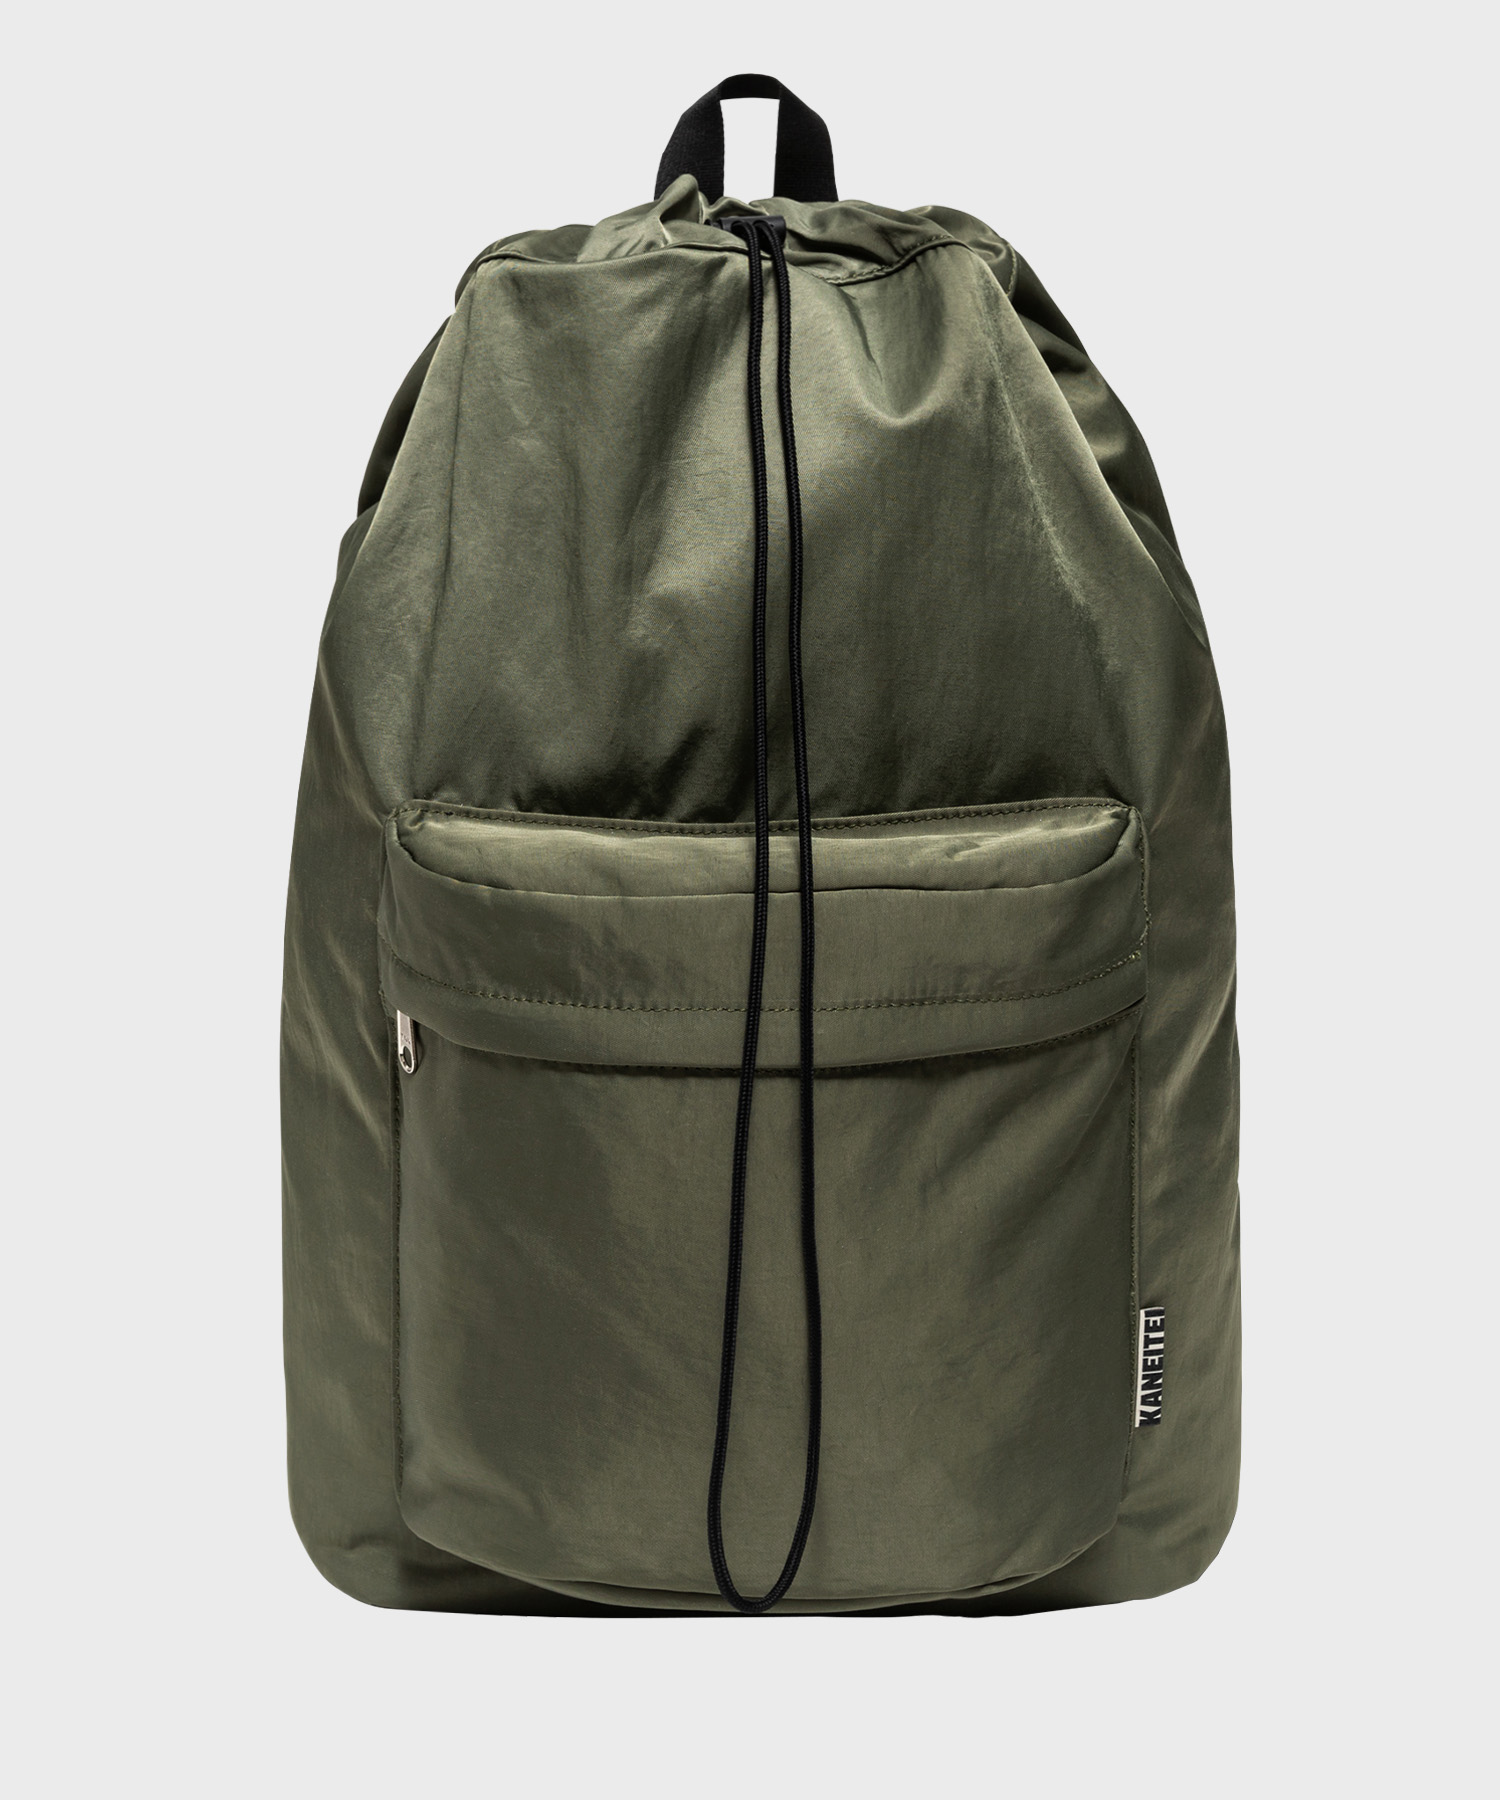 SYDNEY DRAWSTRING BACKPACK (OLIVE DRAB) / RECYCLED